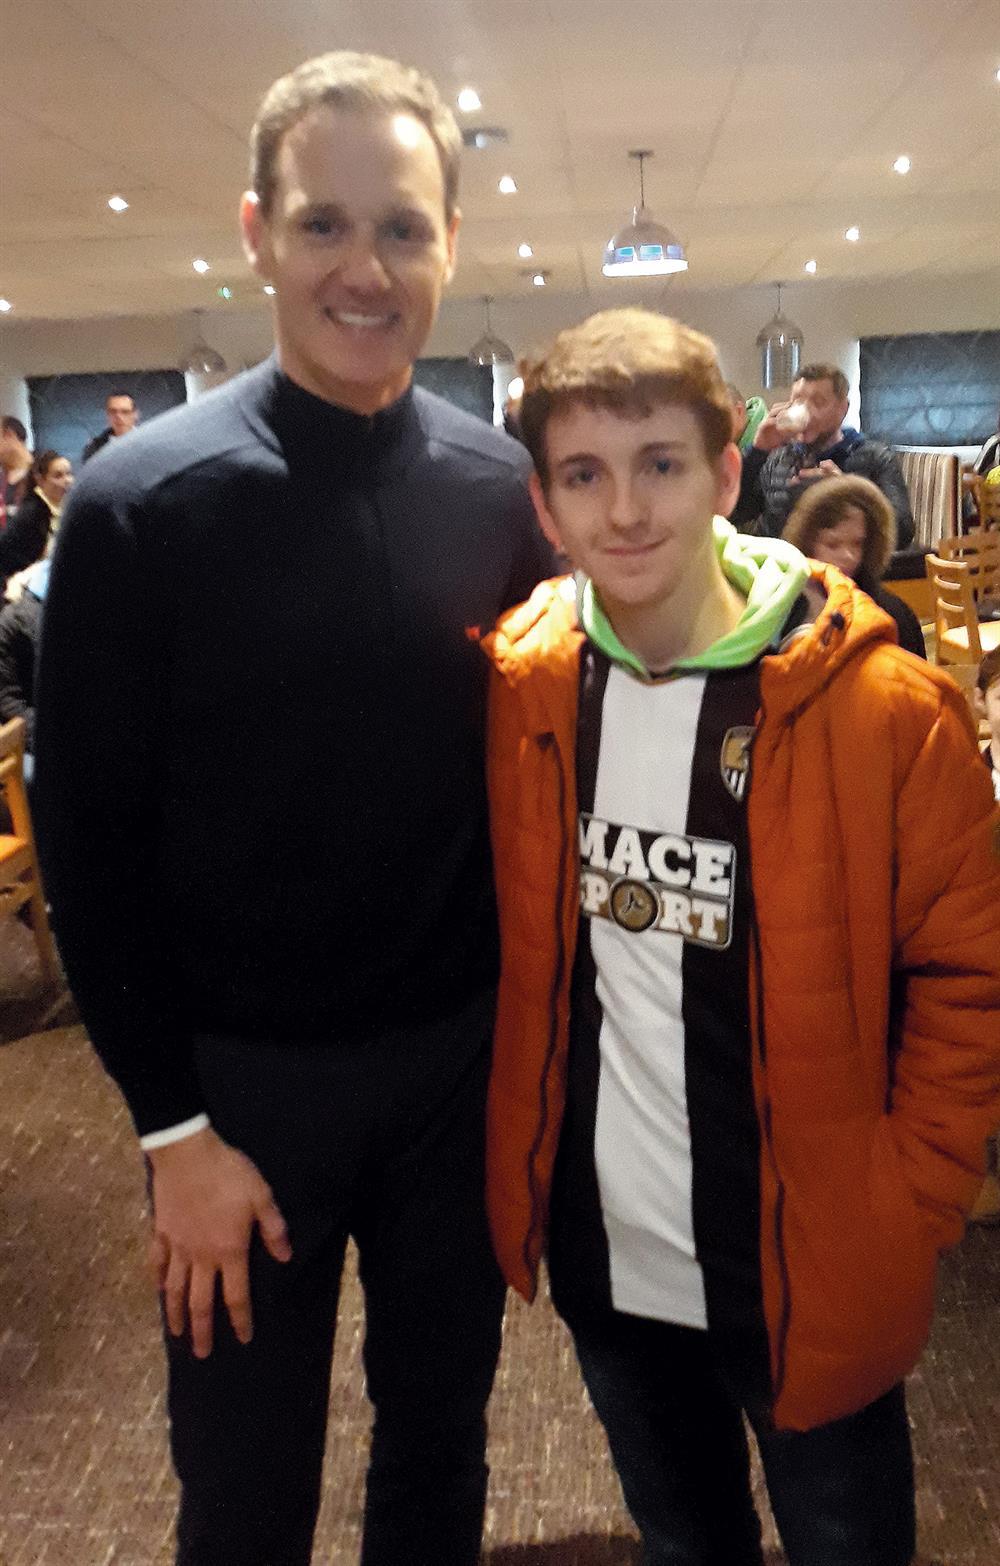 Magpies fan Declan (right) pictured with Football Focus presenter Dan Walker in the Broken Wheelbarrow ahead of the match.